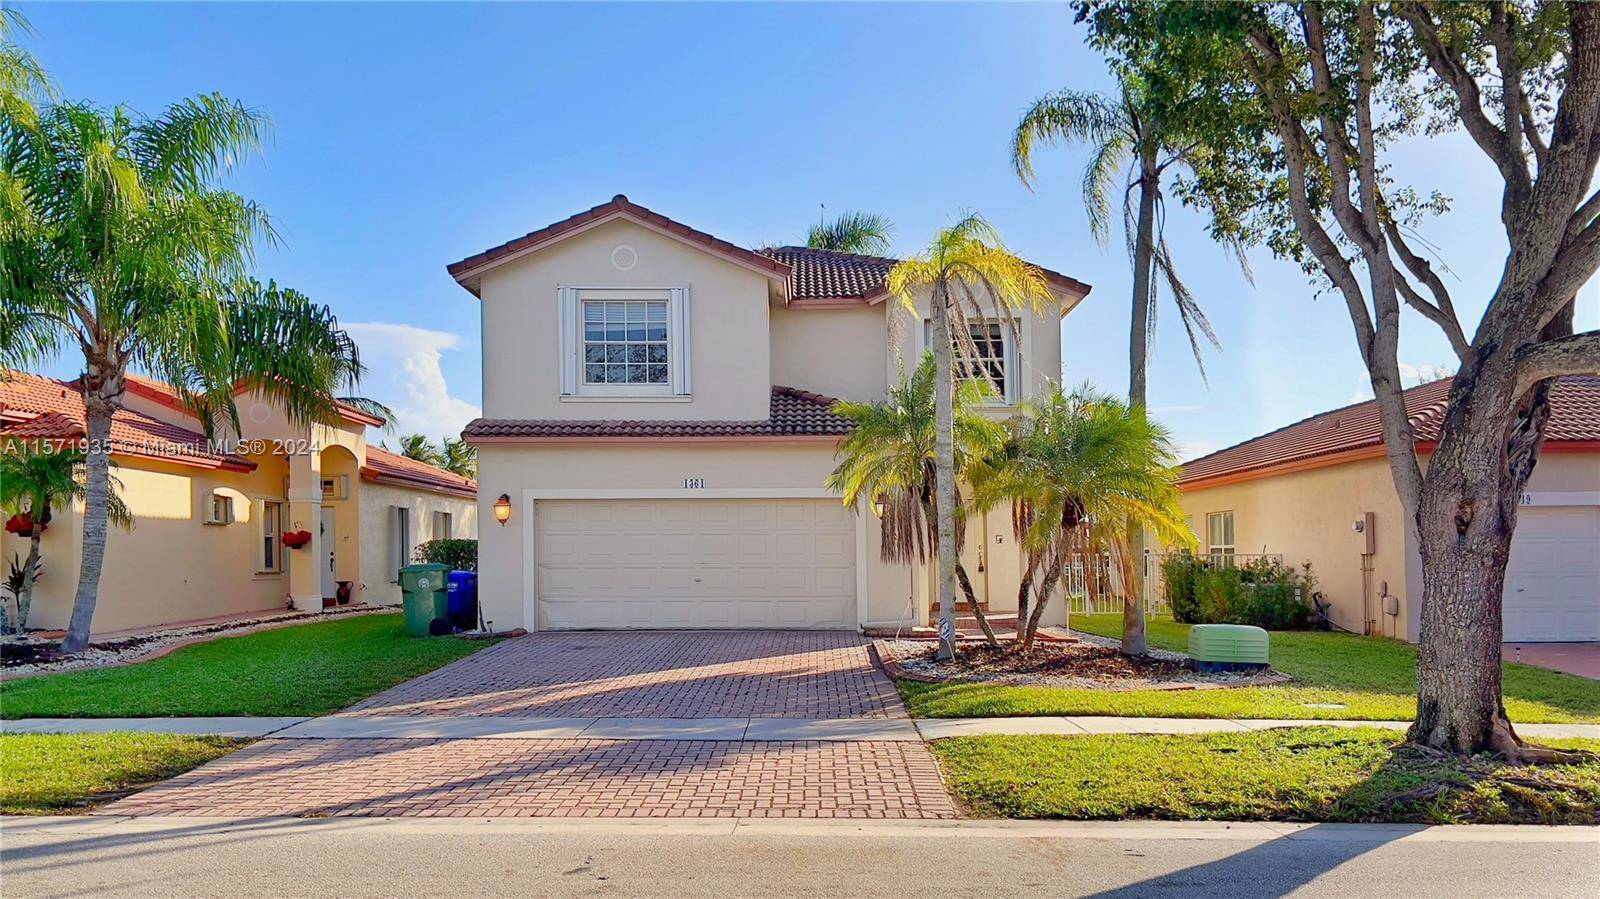 Welcome to Chapel Cove a serene community nestled among excellent schools in Pembroke Pines.